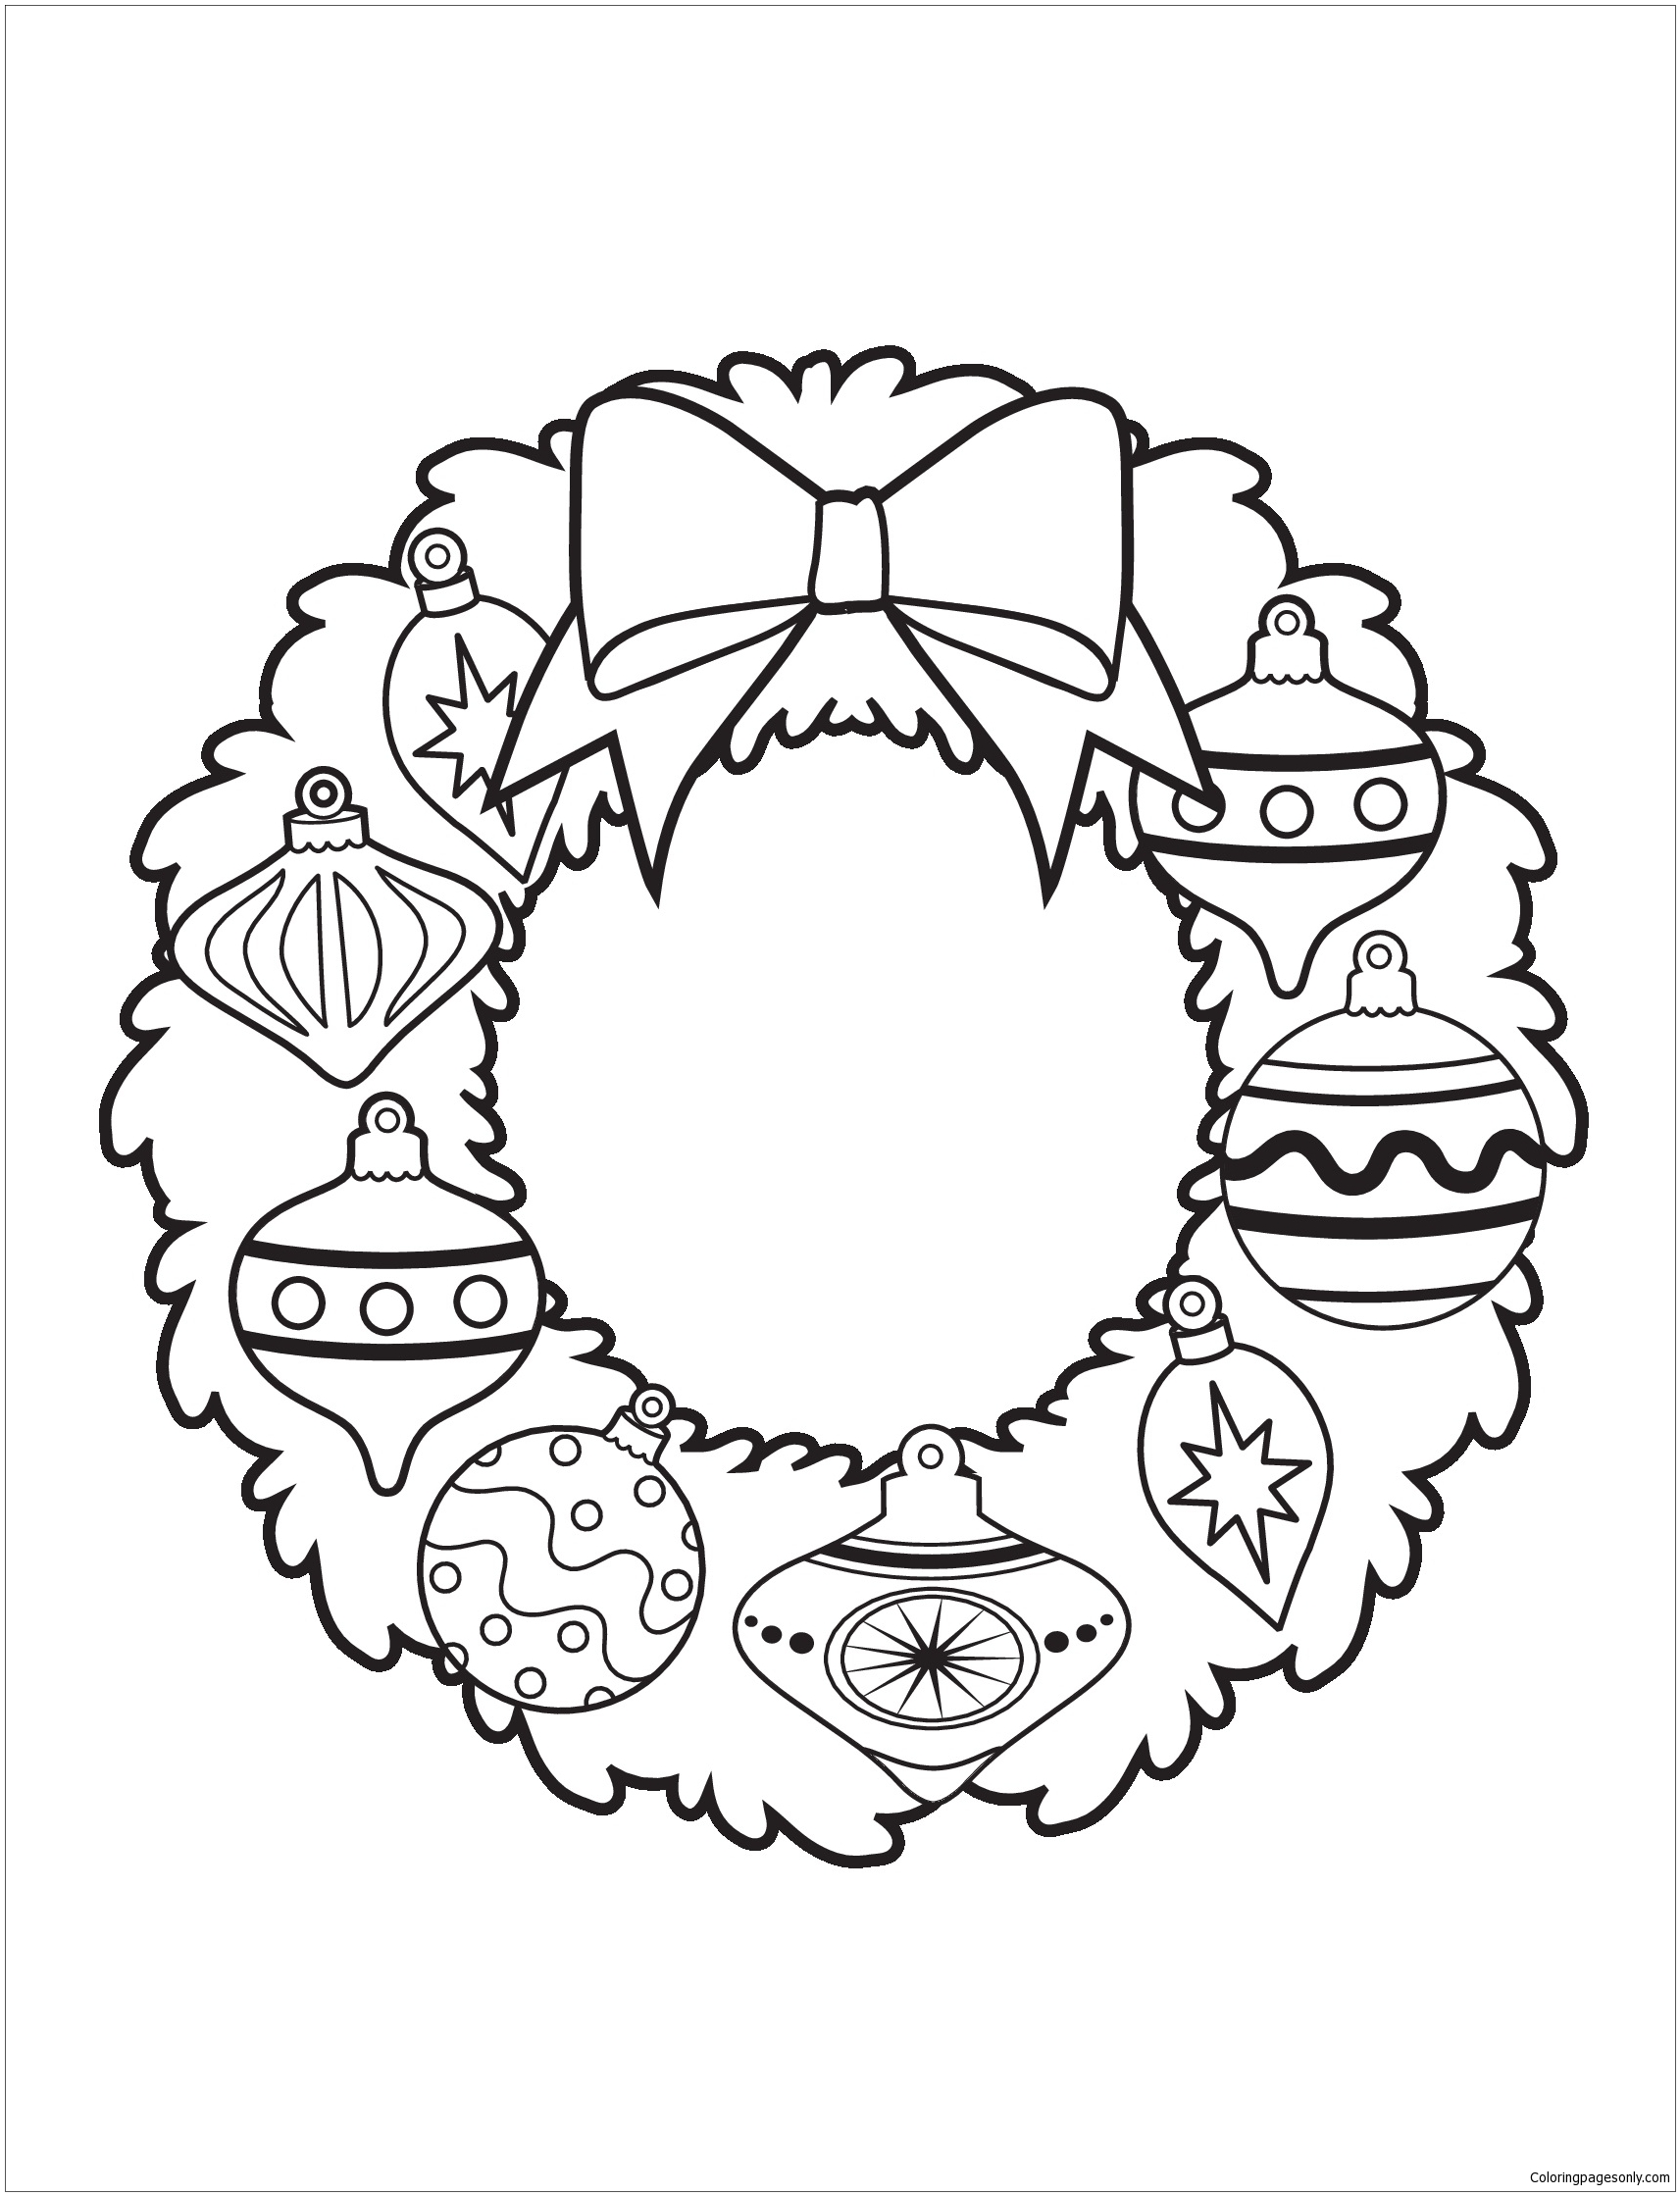 Ornament Wreath Christmas Coloring Page - Free Coloring ...